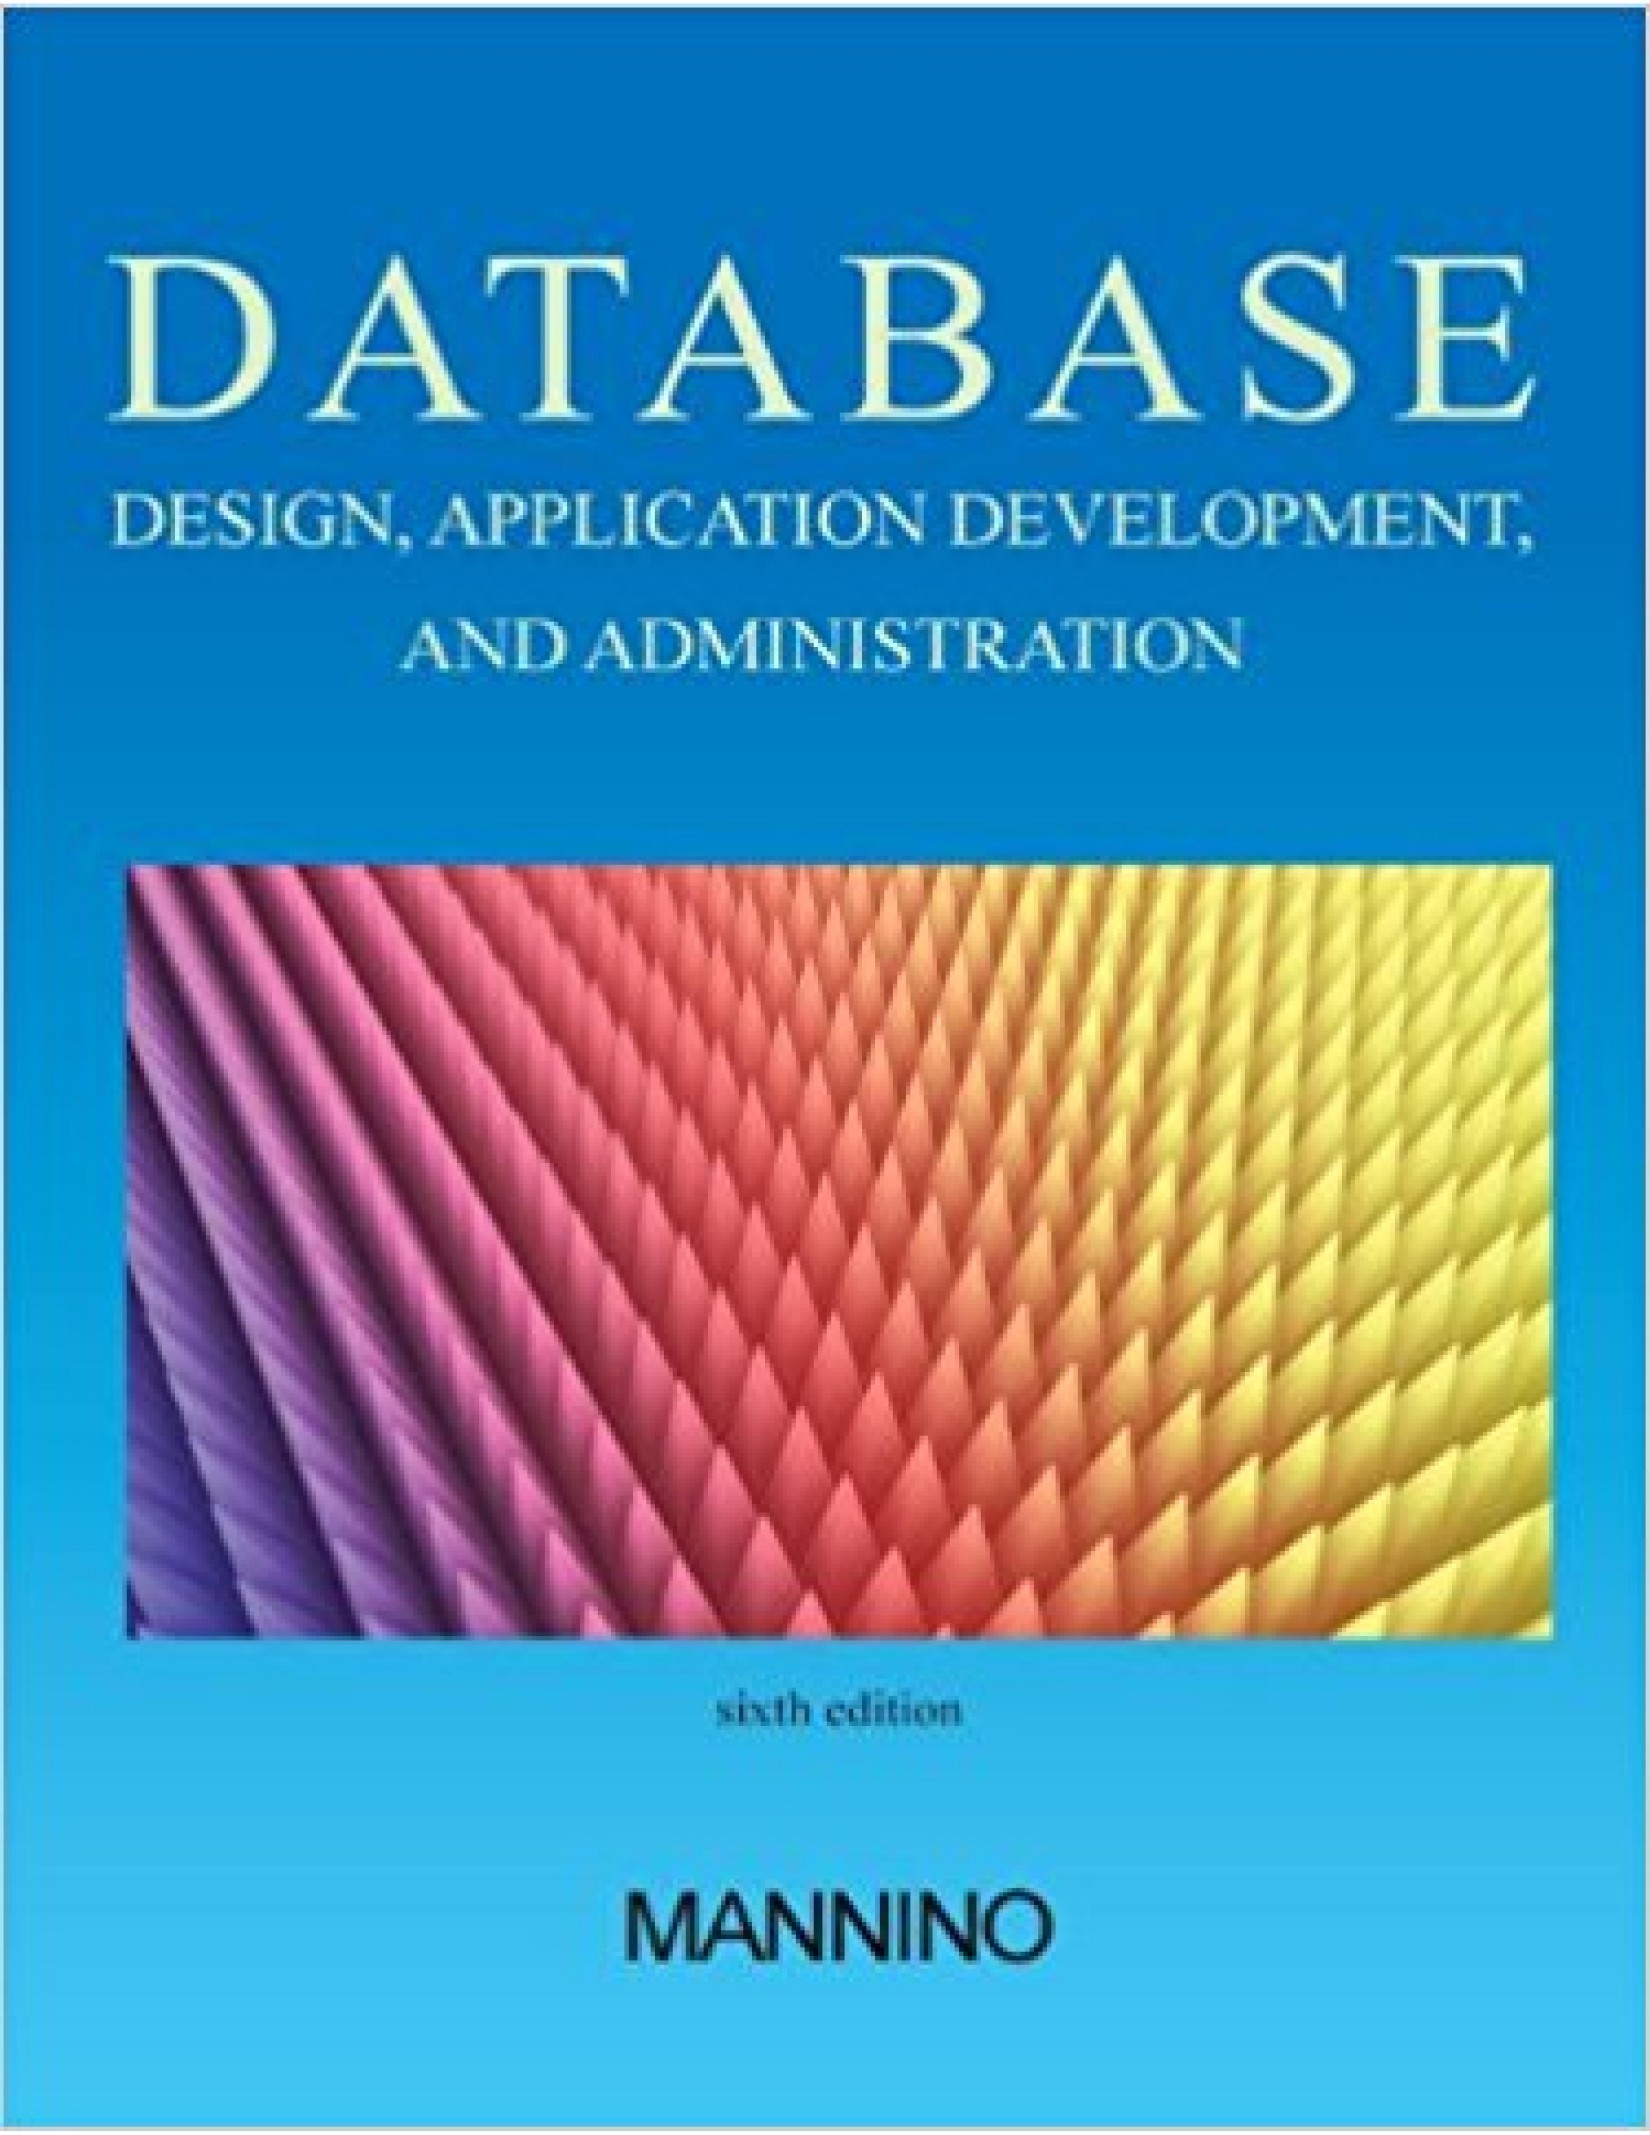 Database Design, Application Development, and Administration, Sixth Edition 6th Edition.jpg